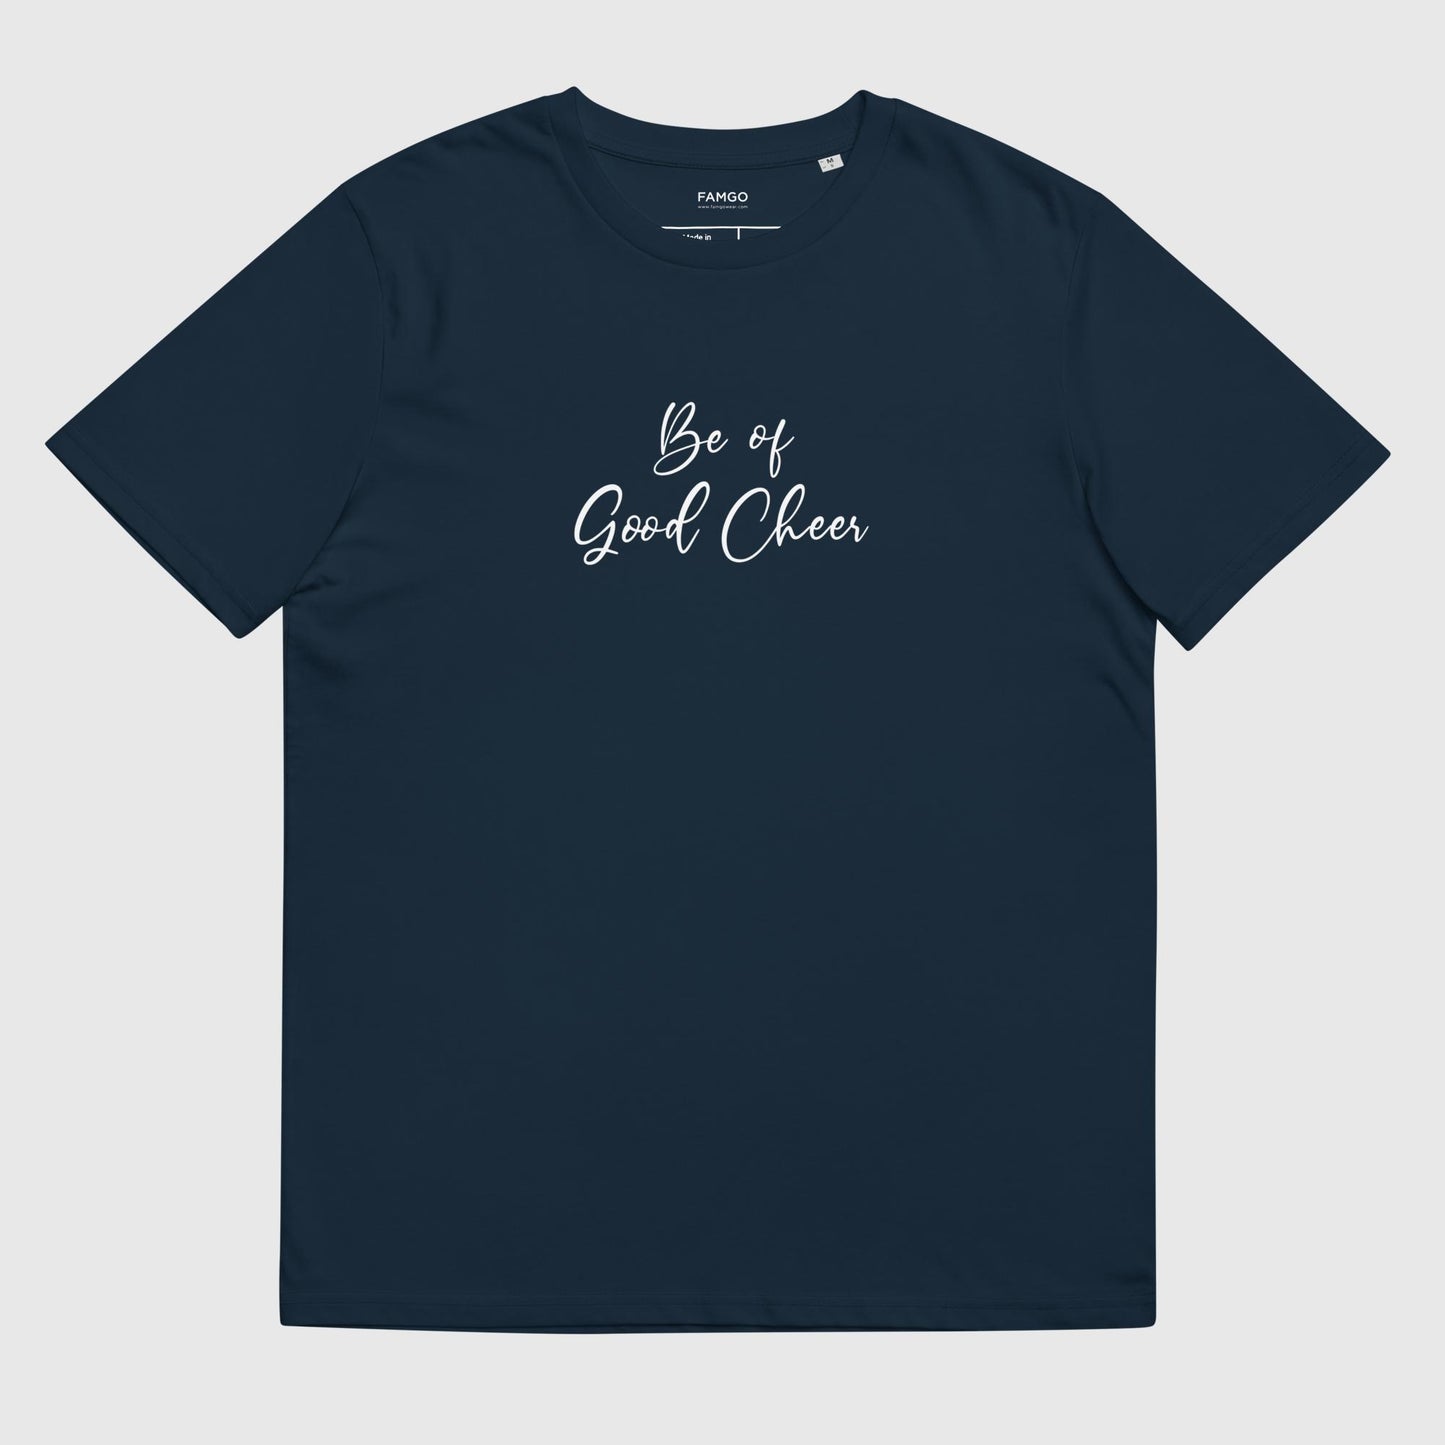 Men's french navy organic cotton t-shirt that features the positive quote, "Be of Good Cheer."